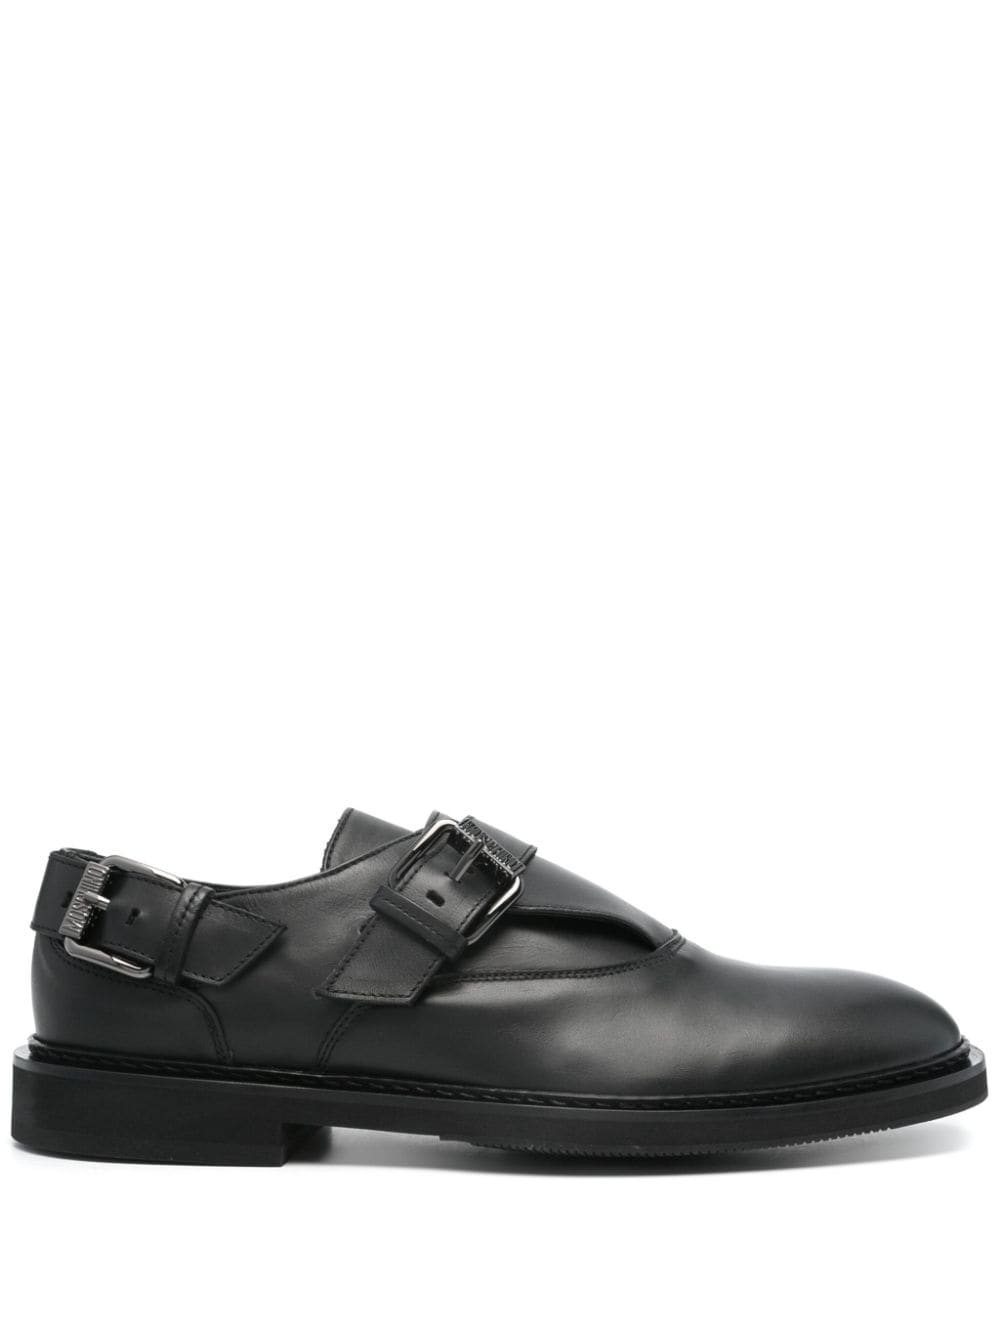 Micro buckled leather monk shoes